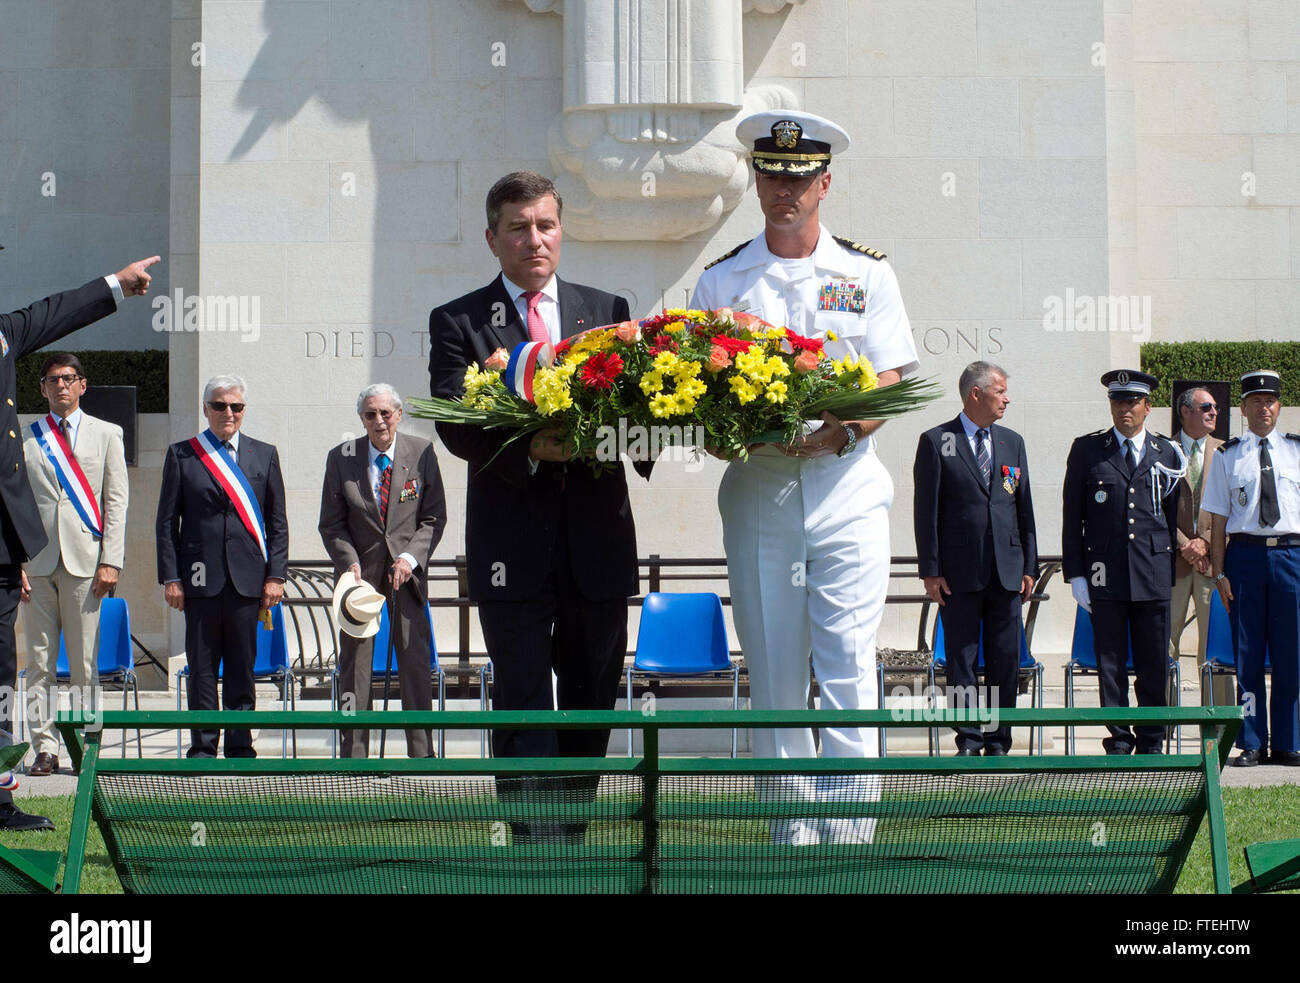 DRAGUIGNAN, France (August 16, 2013) – Charles Rivkin, left, United States Ambassador to France and Monaco and Capt. Craig Clapperton, USS Mount Whitney’s (LCC 20) commanding officer, lay a wreath during a ceremony at the Rhone American Cemetery in honor of the 69th anniversary celebration of allied troops landing in Provence during World War II. This visit serves to continue U.S. 6th Fleet efforts to build global maritime partnerships with European nations and improve maritime safety and security. Stock Photo